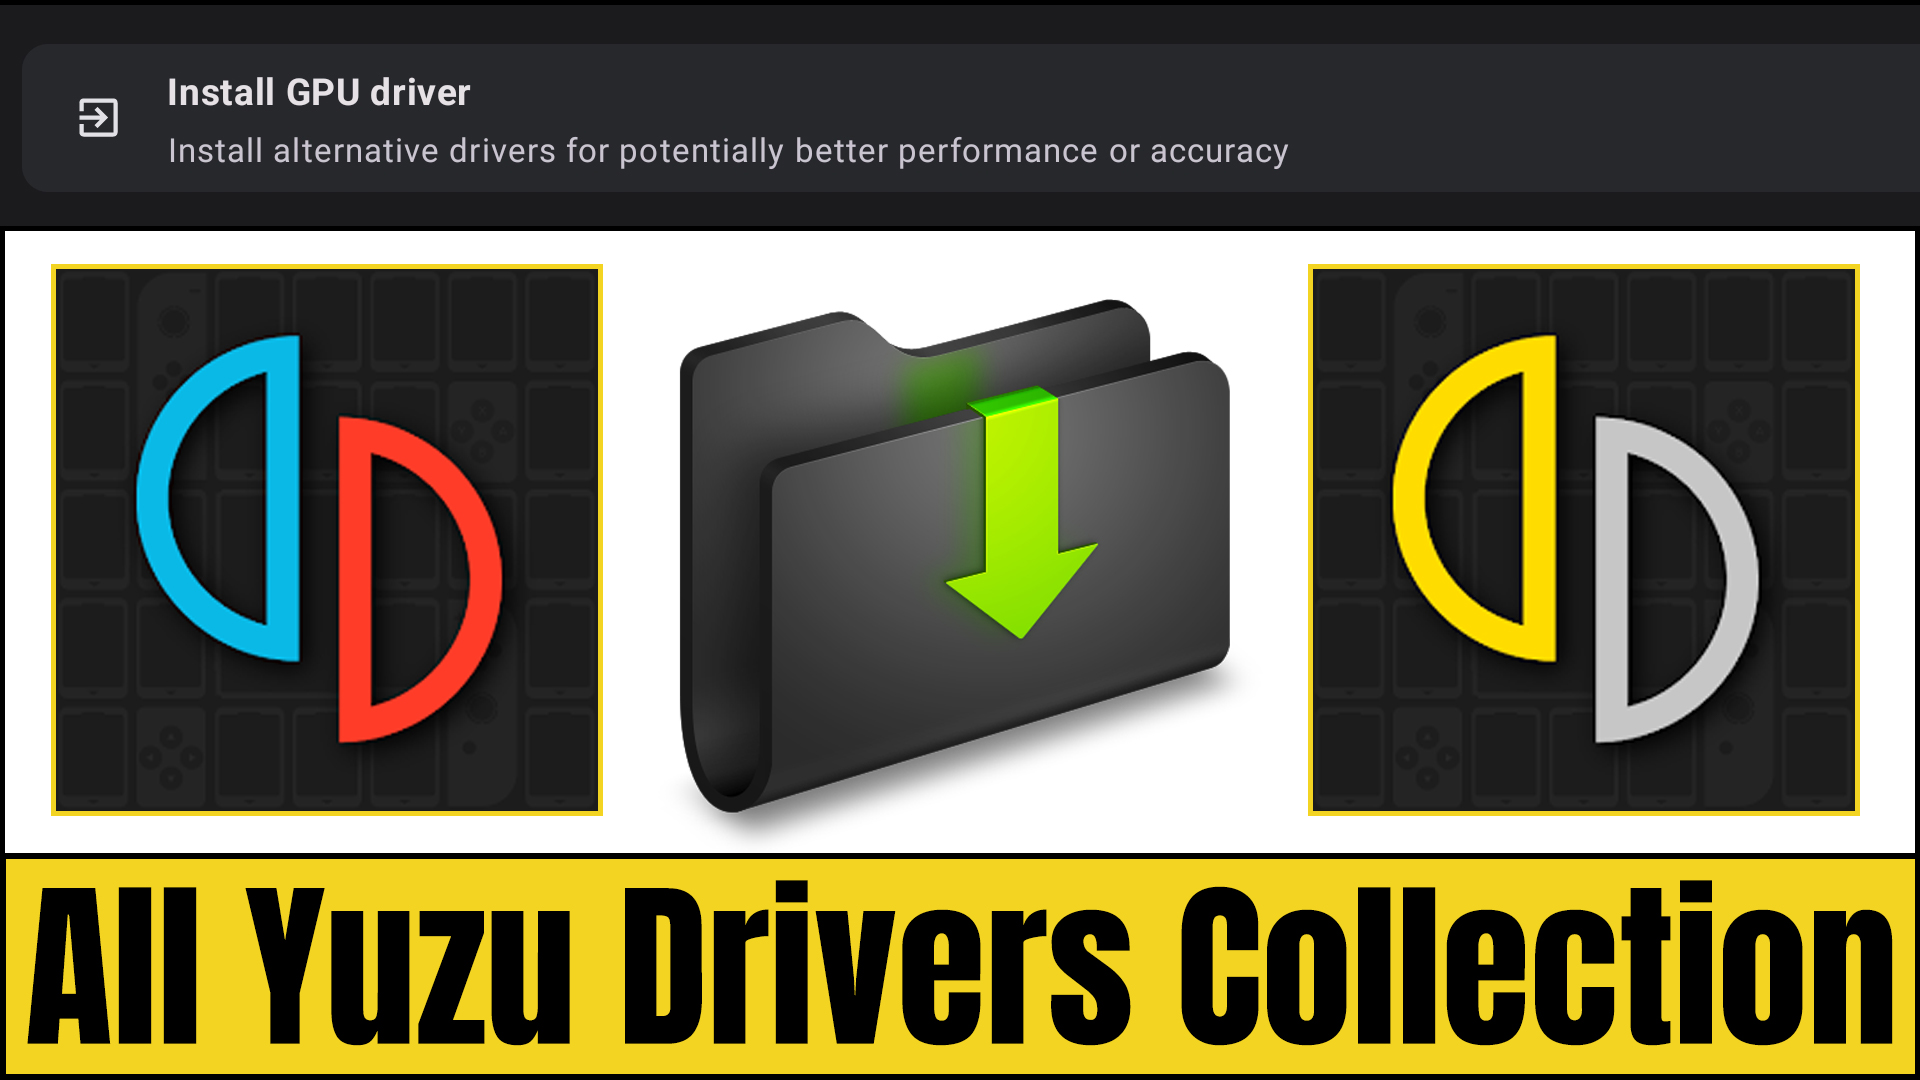 All Yuzu Drivers Collection